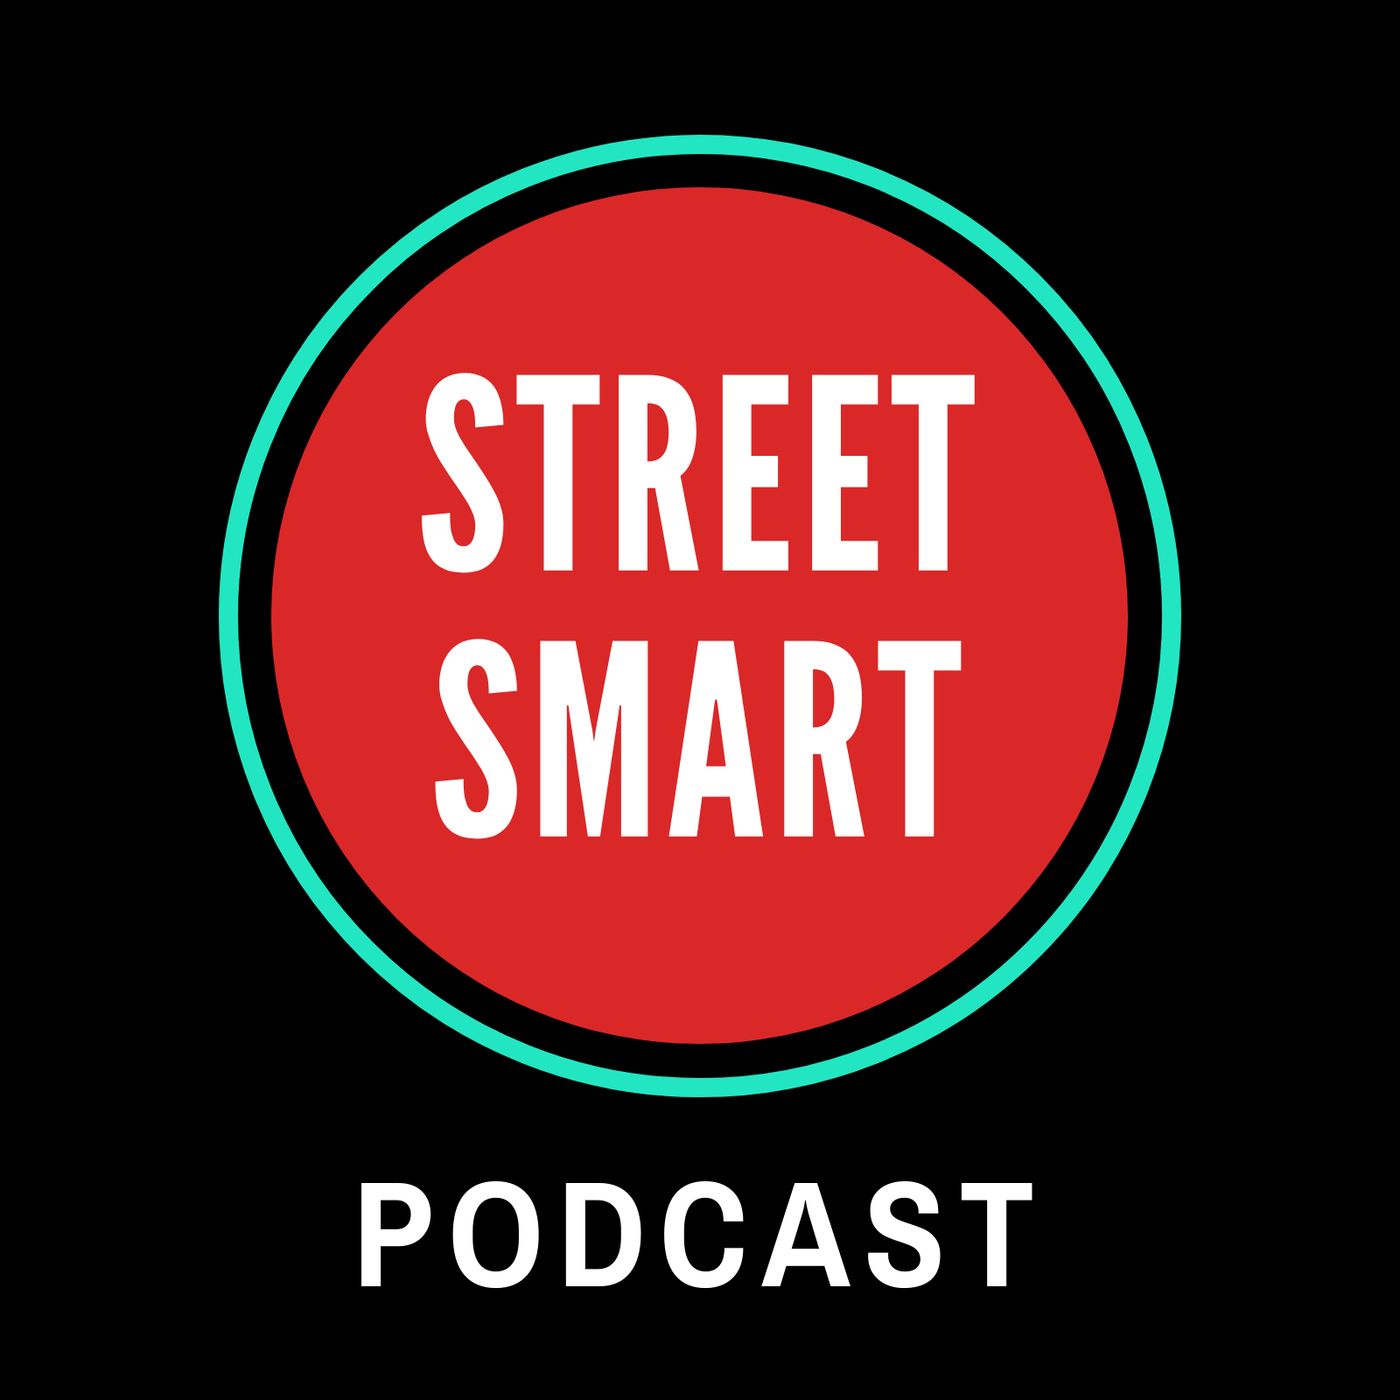 Street Smart Podcast I Welcome to the Machine